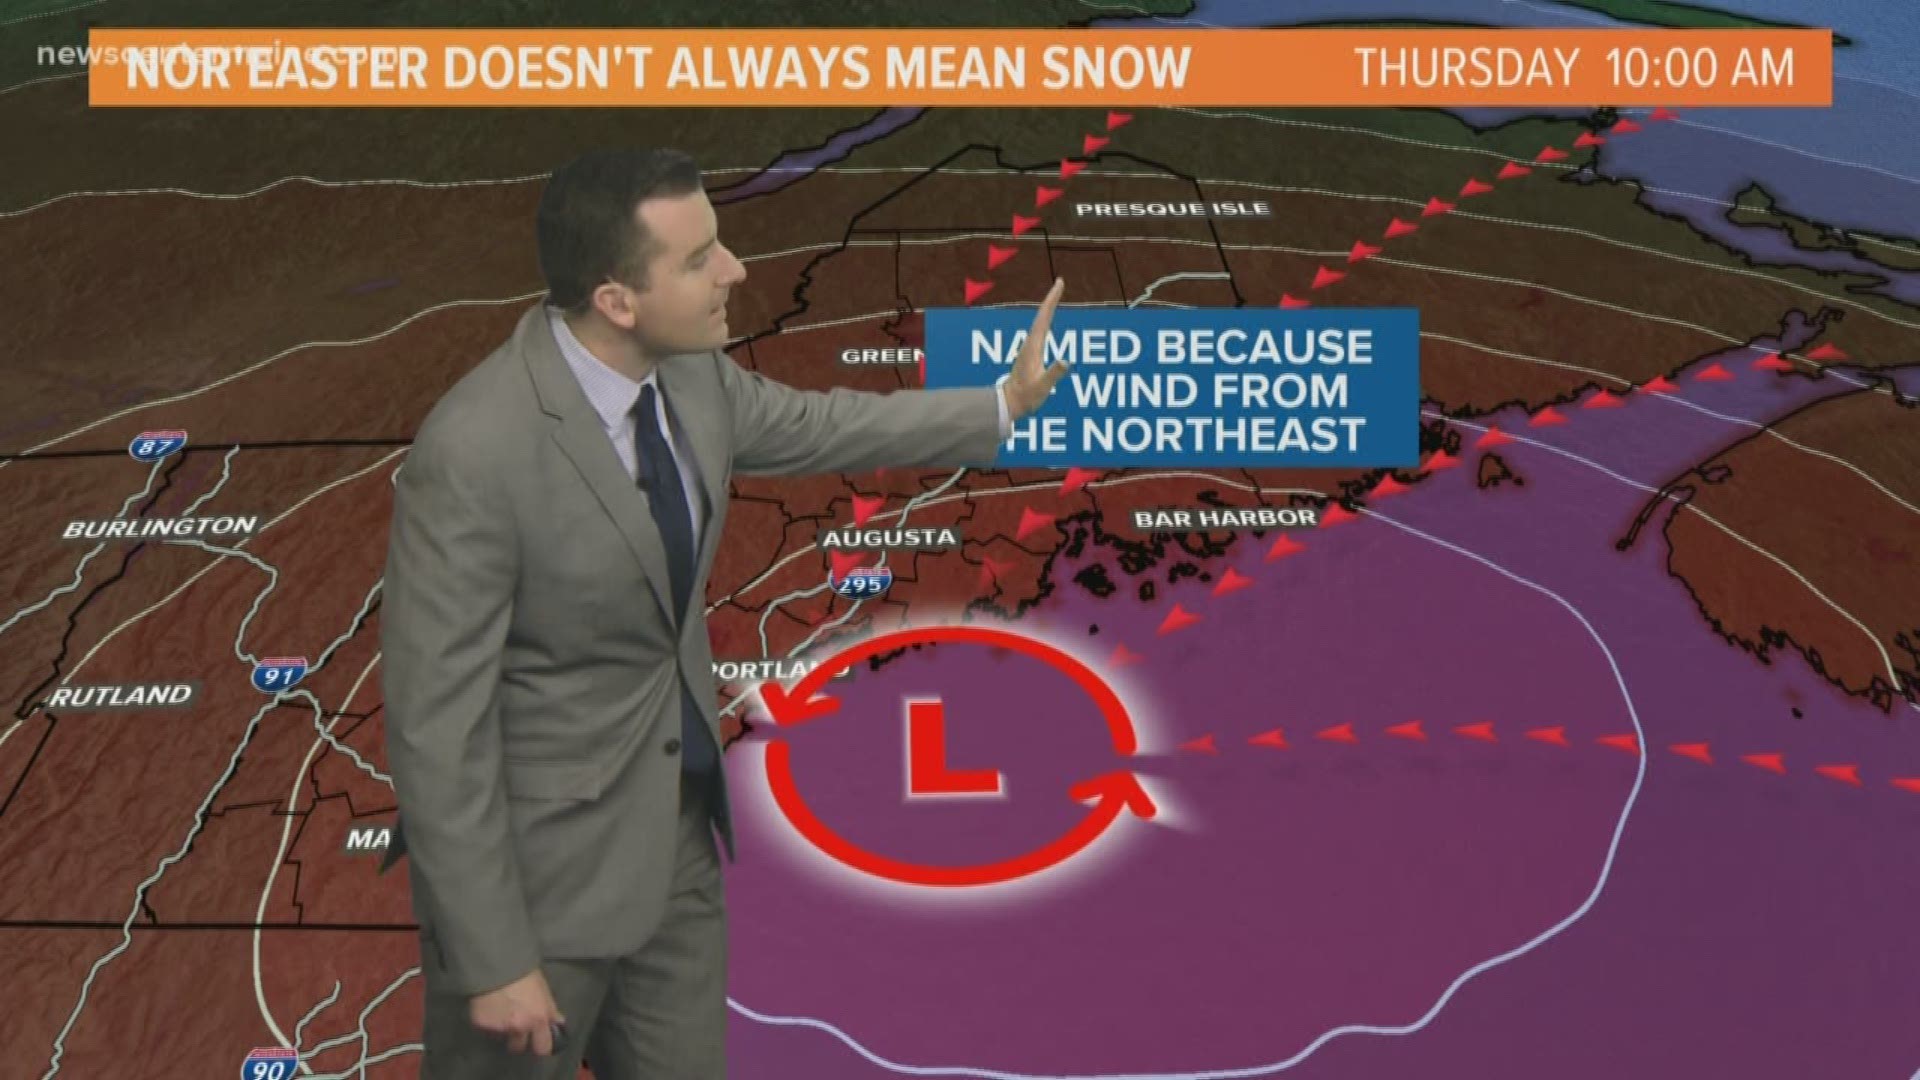 Meteorologist Ryan Breton explains why storms can be called nor'easters, even when they do not produce snow.